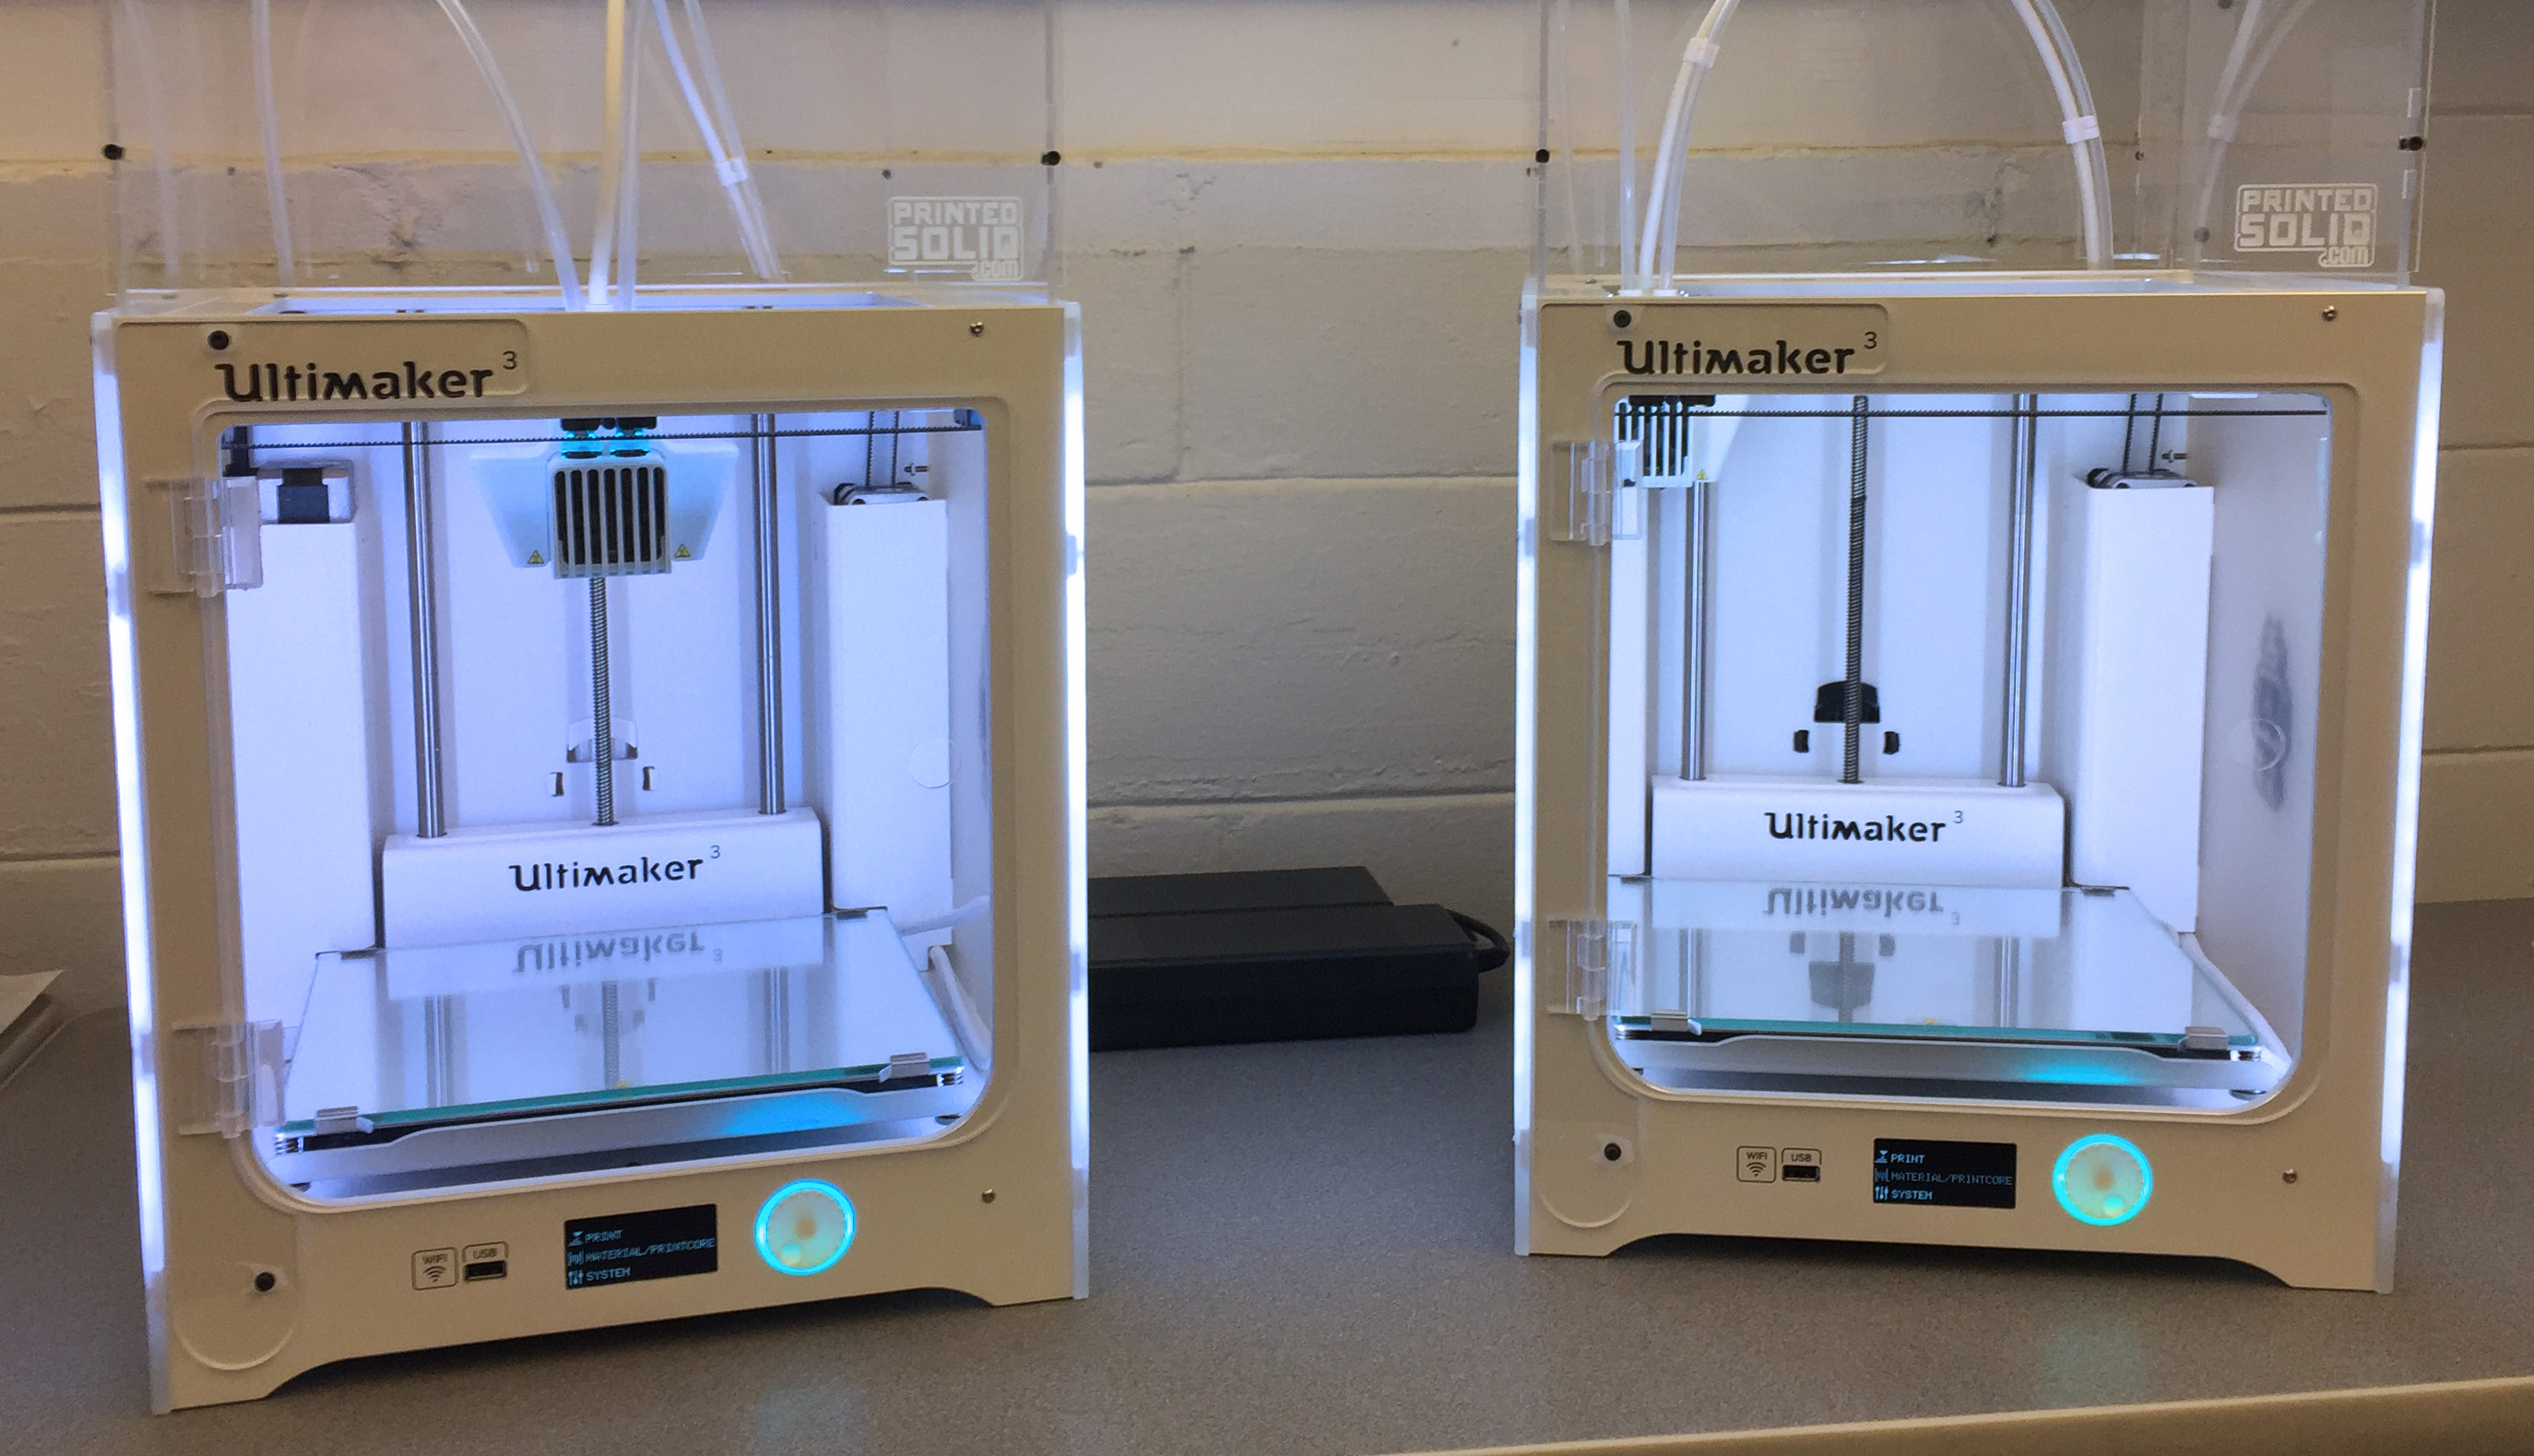 Second New Ultimaker 3 - Dual Ultimaker3 Printers2